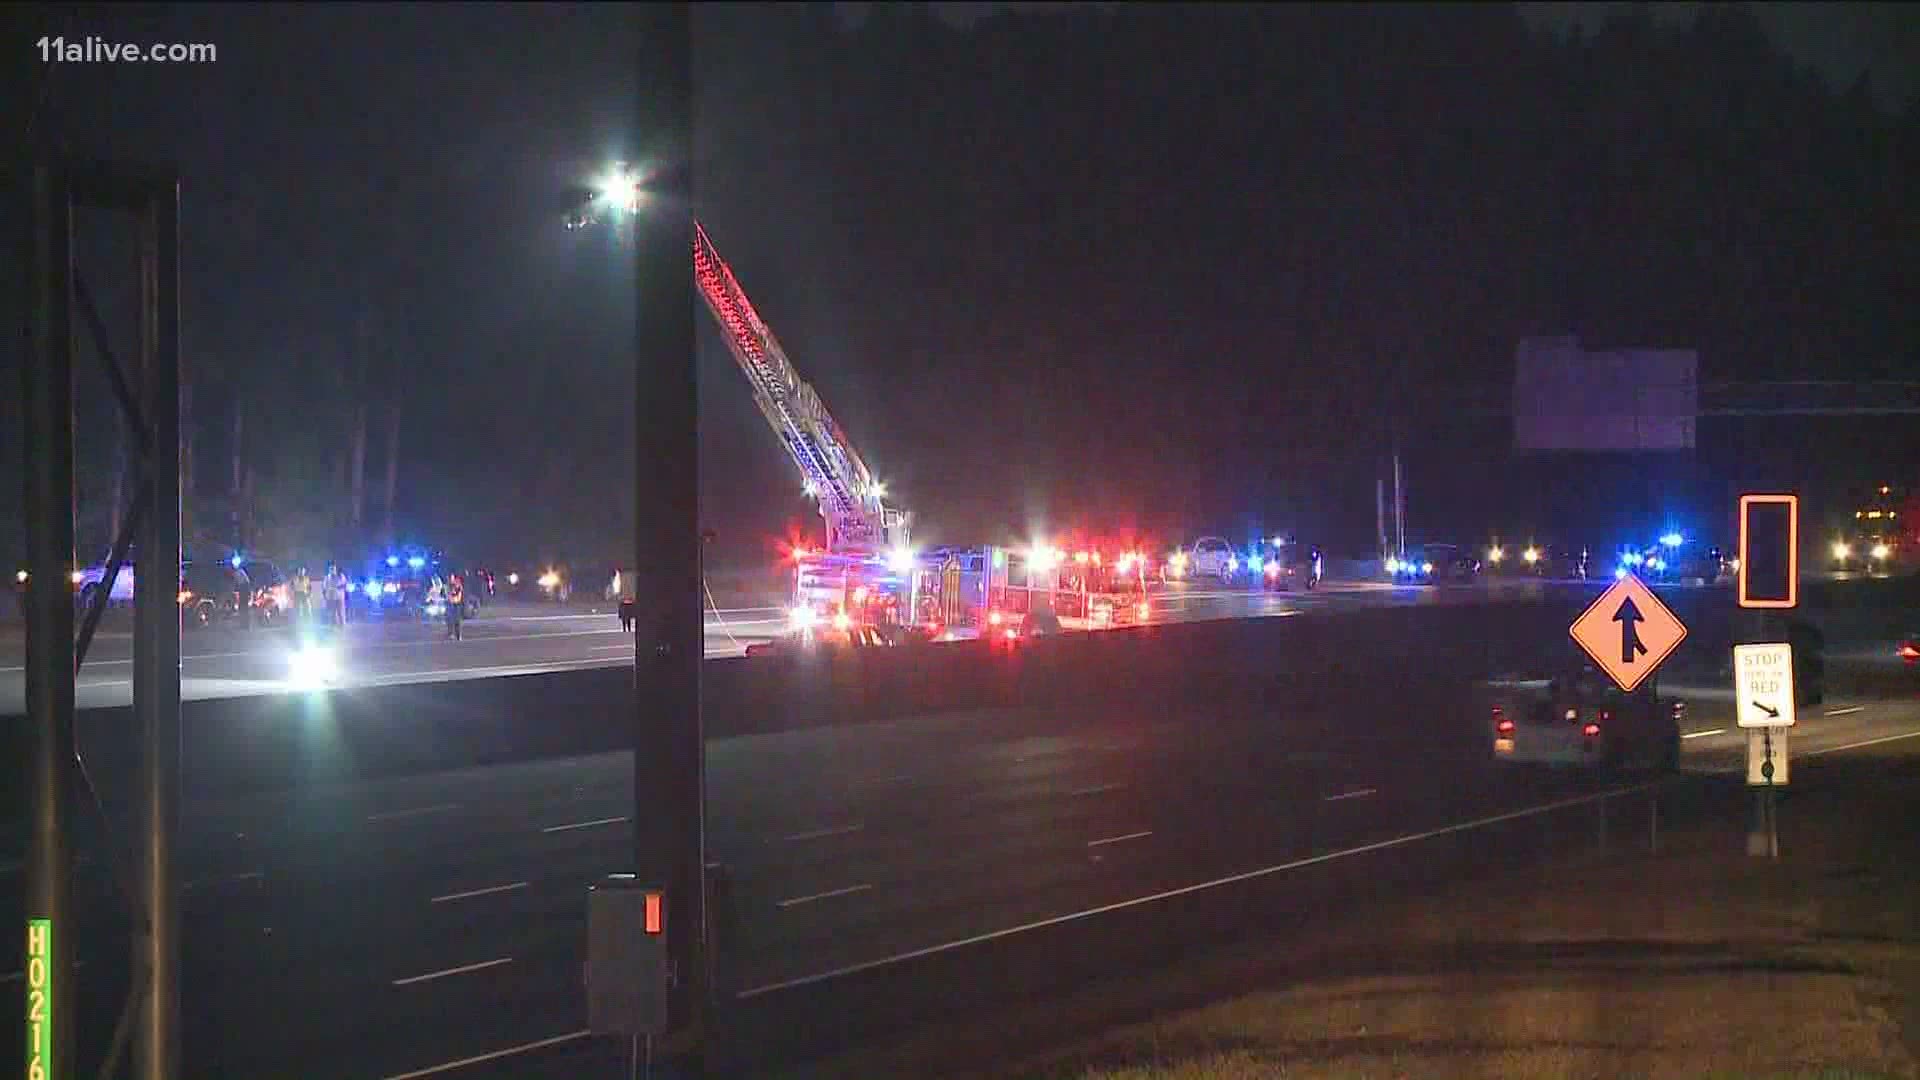 Police said a pedestrian was struck and killed early Sunday morning on Interstate 285 near Northside Drive.